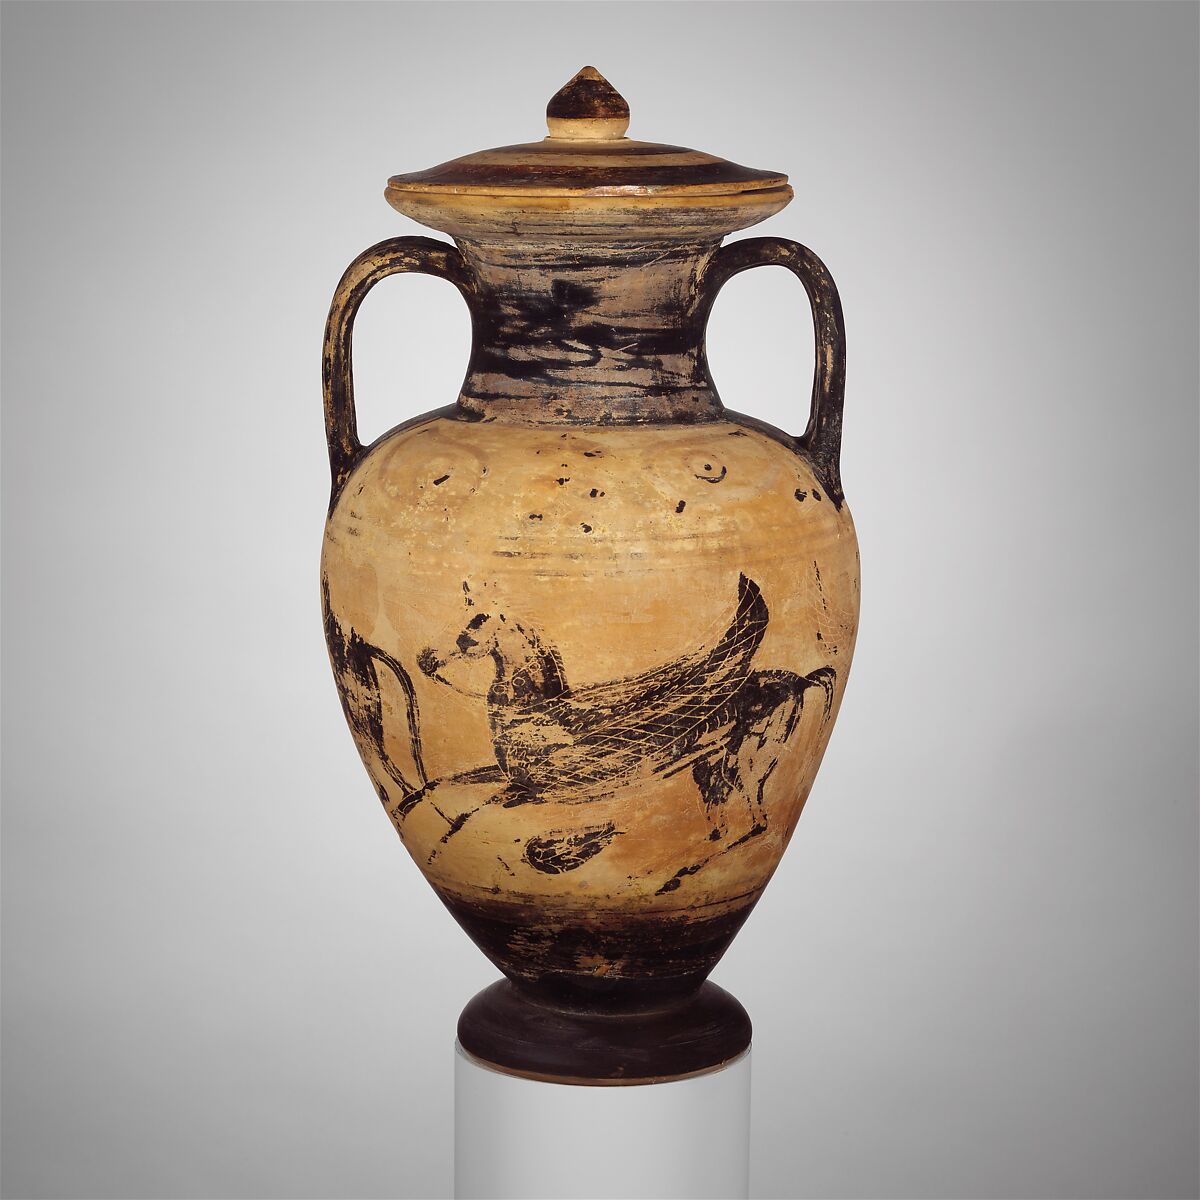 Terracotta neck-amphora (jar) with lid, Attributed to the Micali Painter, Terracotta, Etruscan 